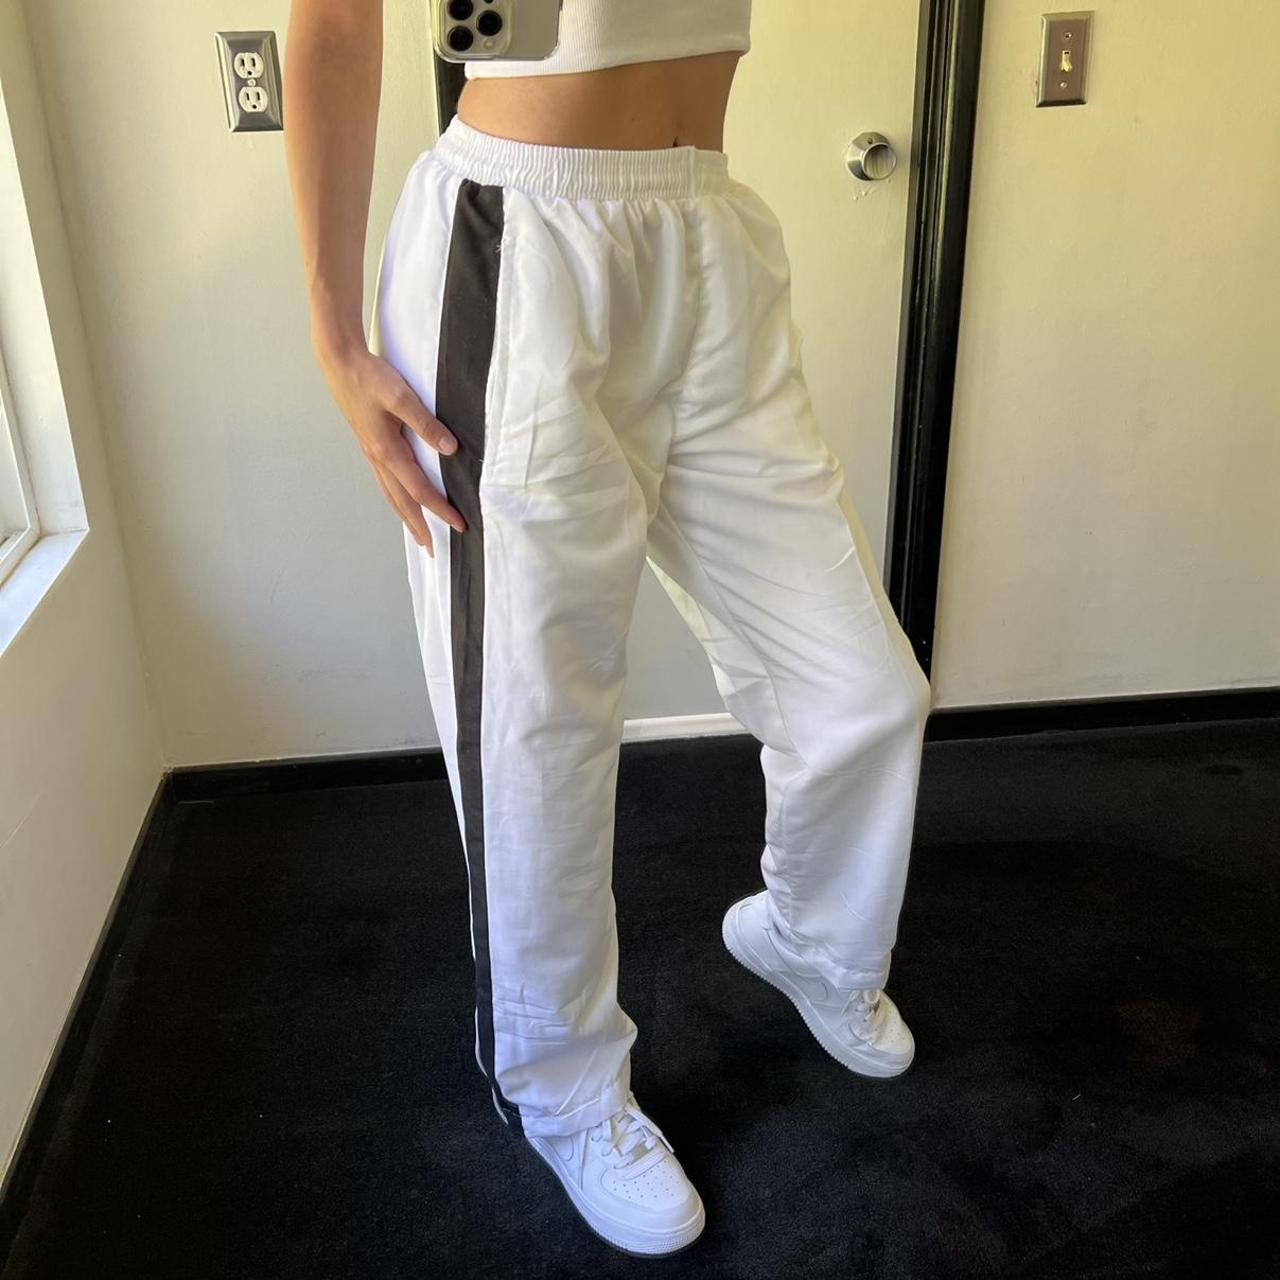 Product Image 4 - White and black striped sweatpants